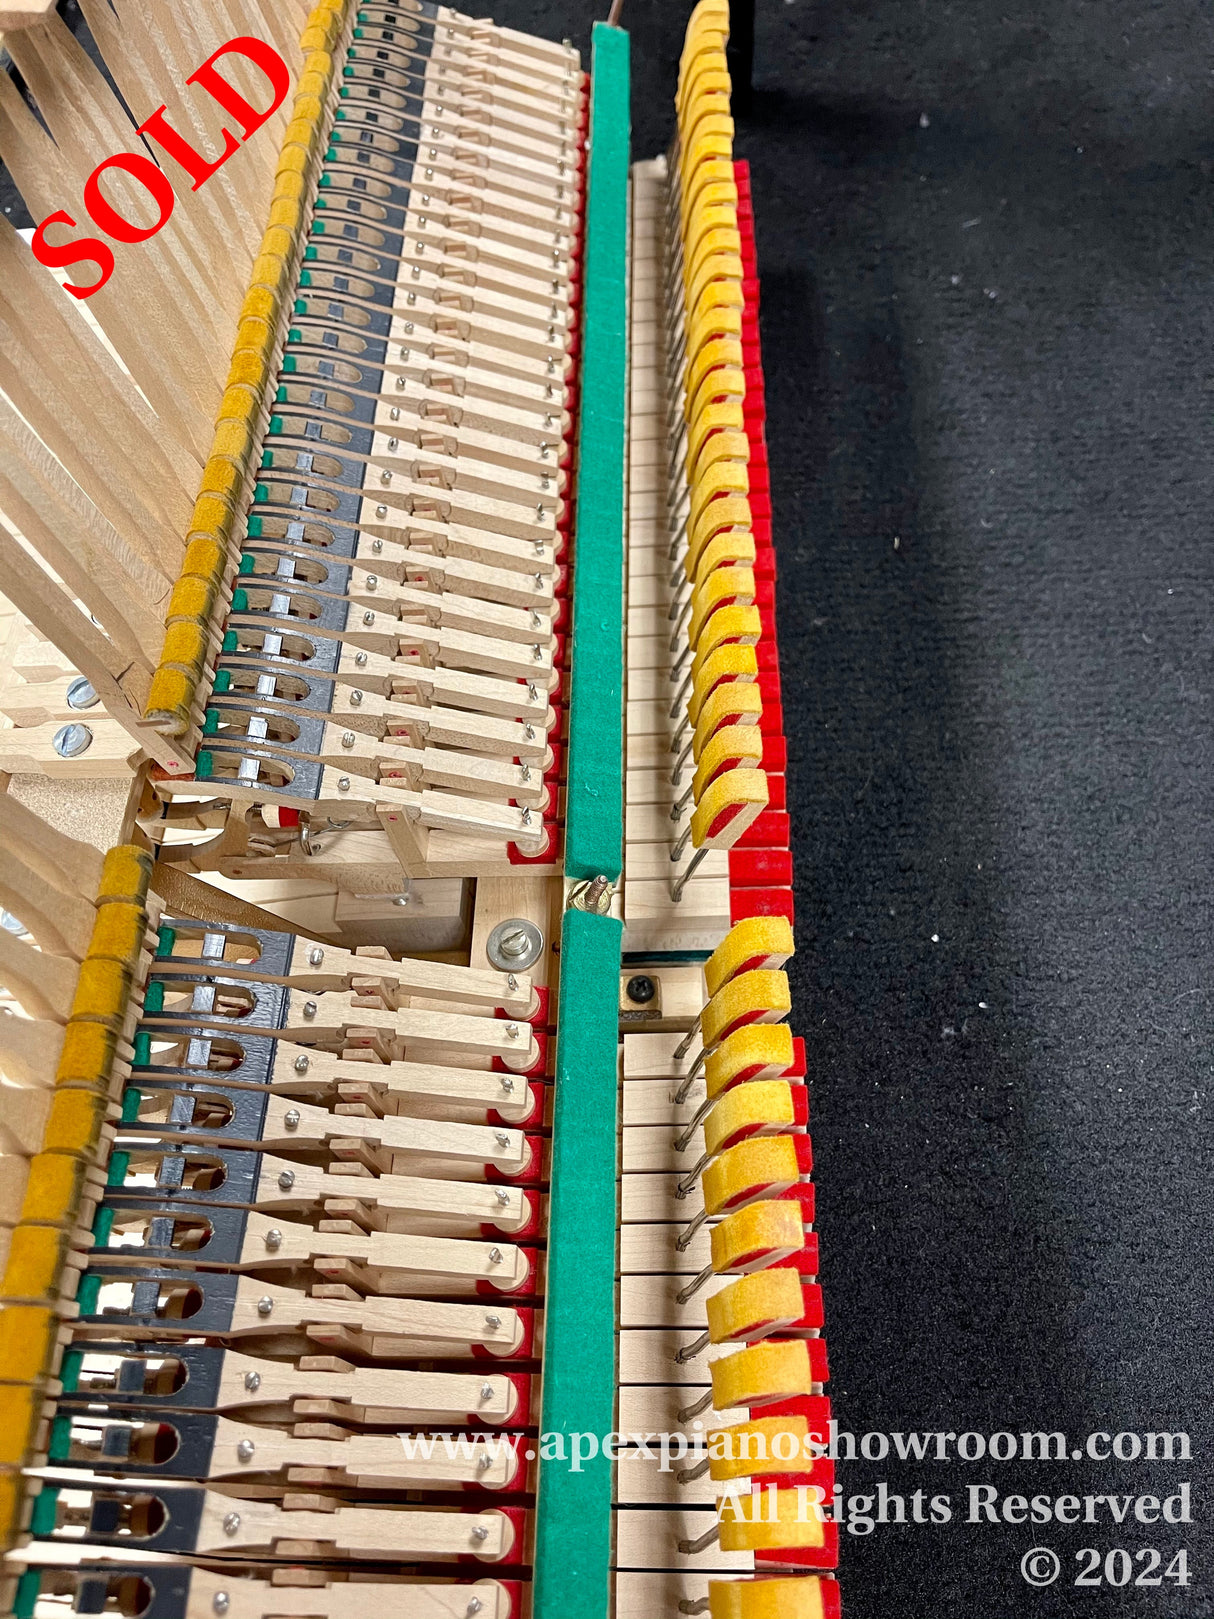 Interior view of a piano showcasing the hammer mechanism and strings, with dampers and hammers visible, indicative of piano maintenance or tuning process.